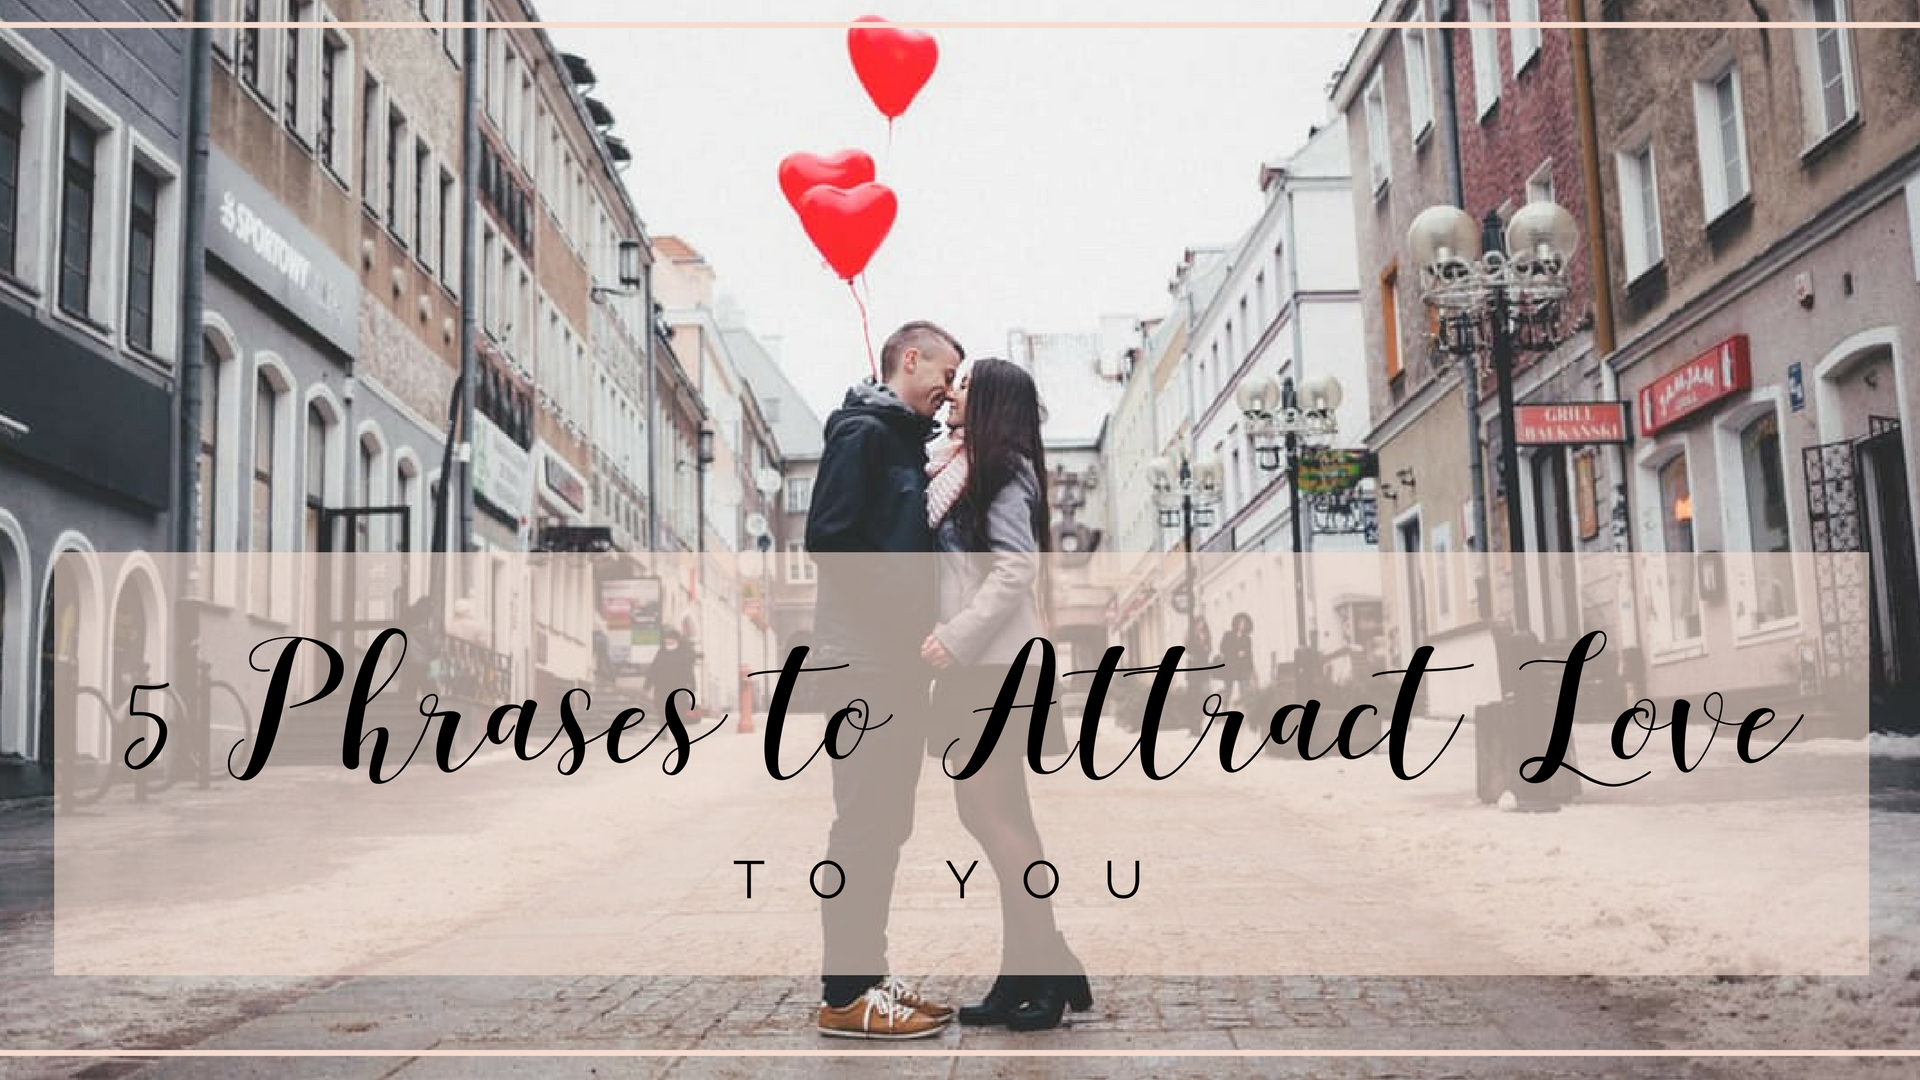 5 Phrases to Attract Love to You Opportunity — Emyrald Sinclaire